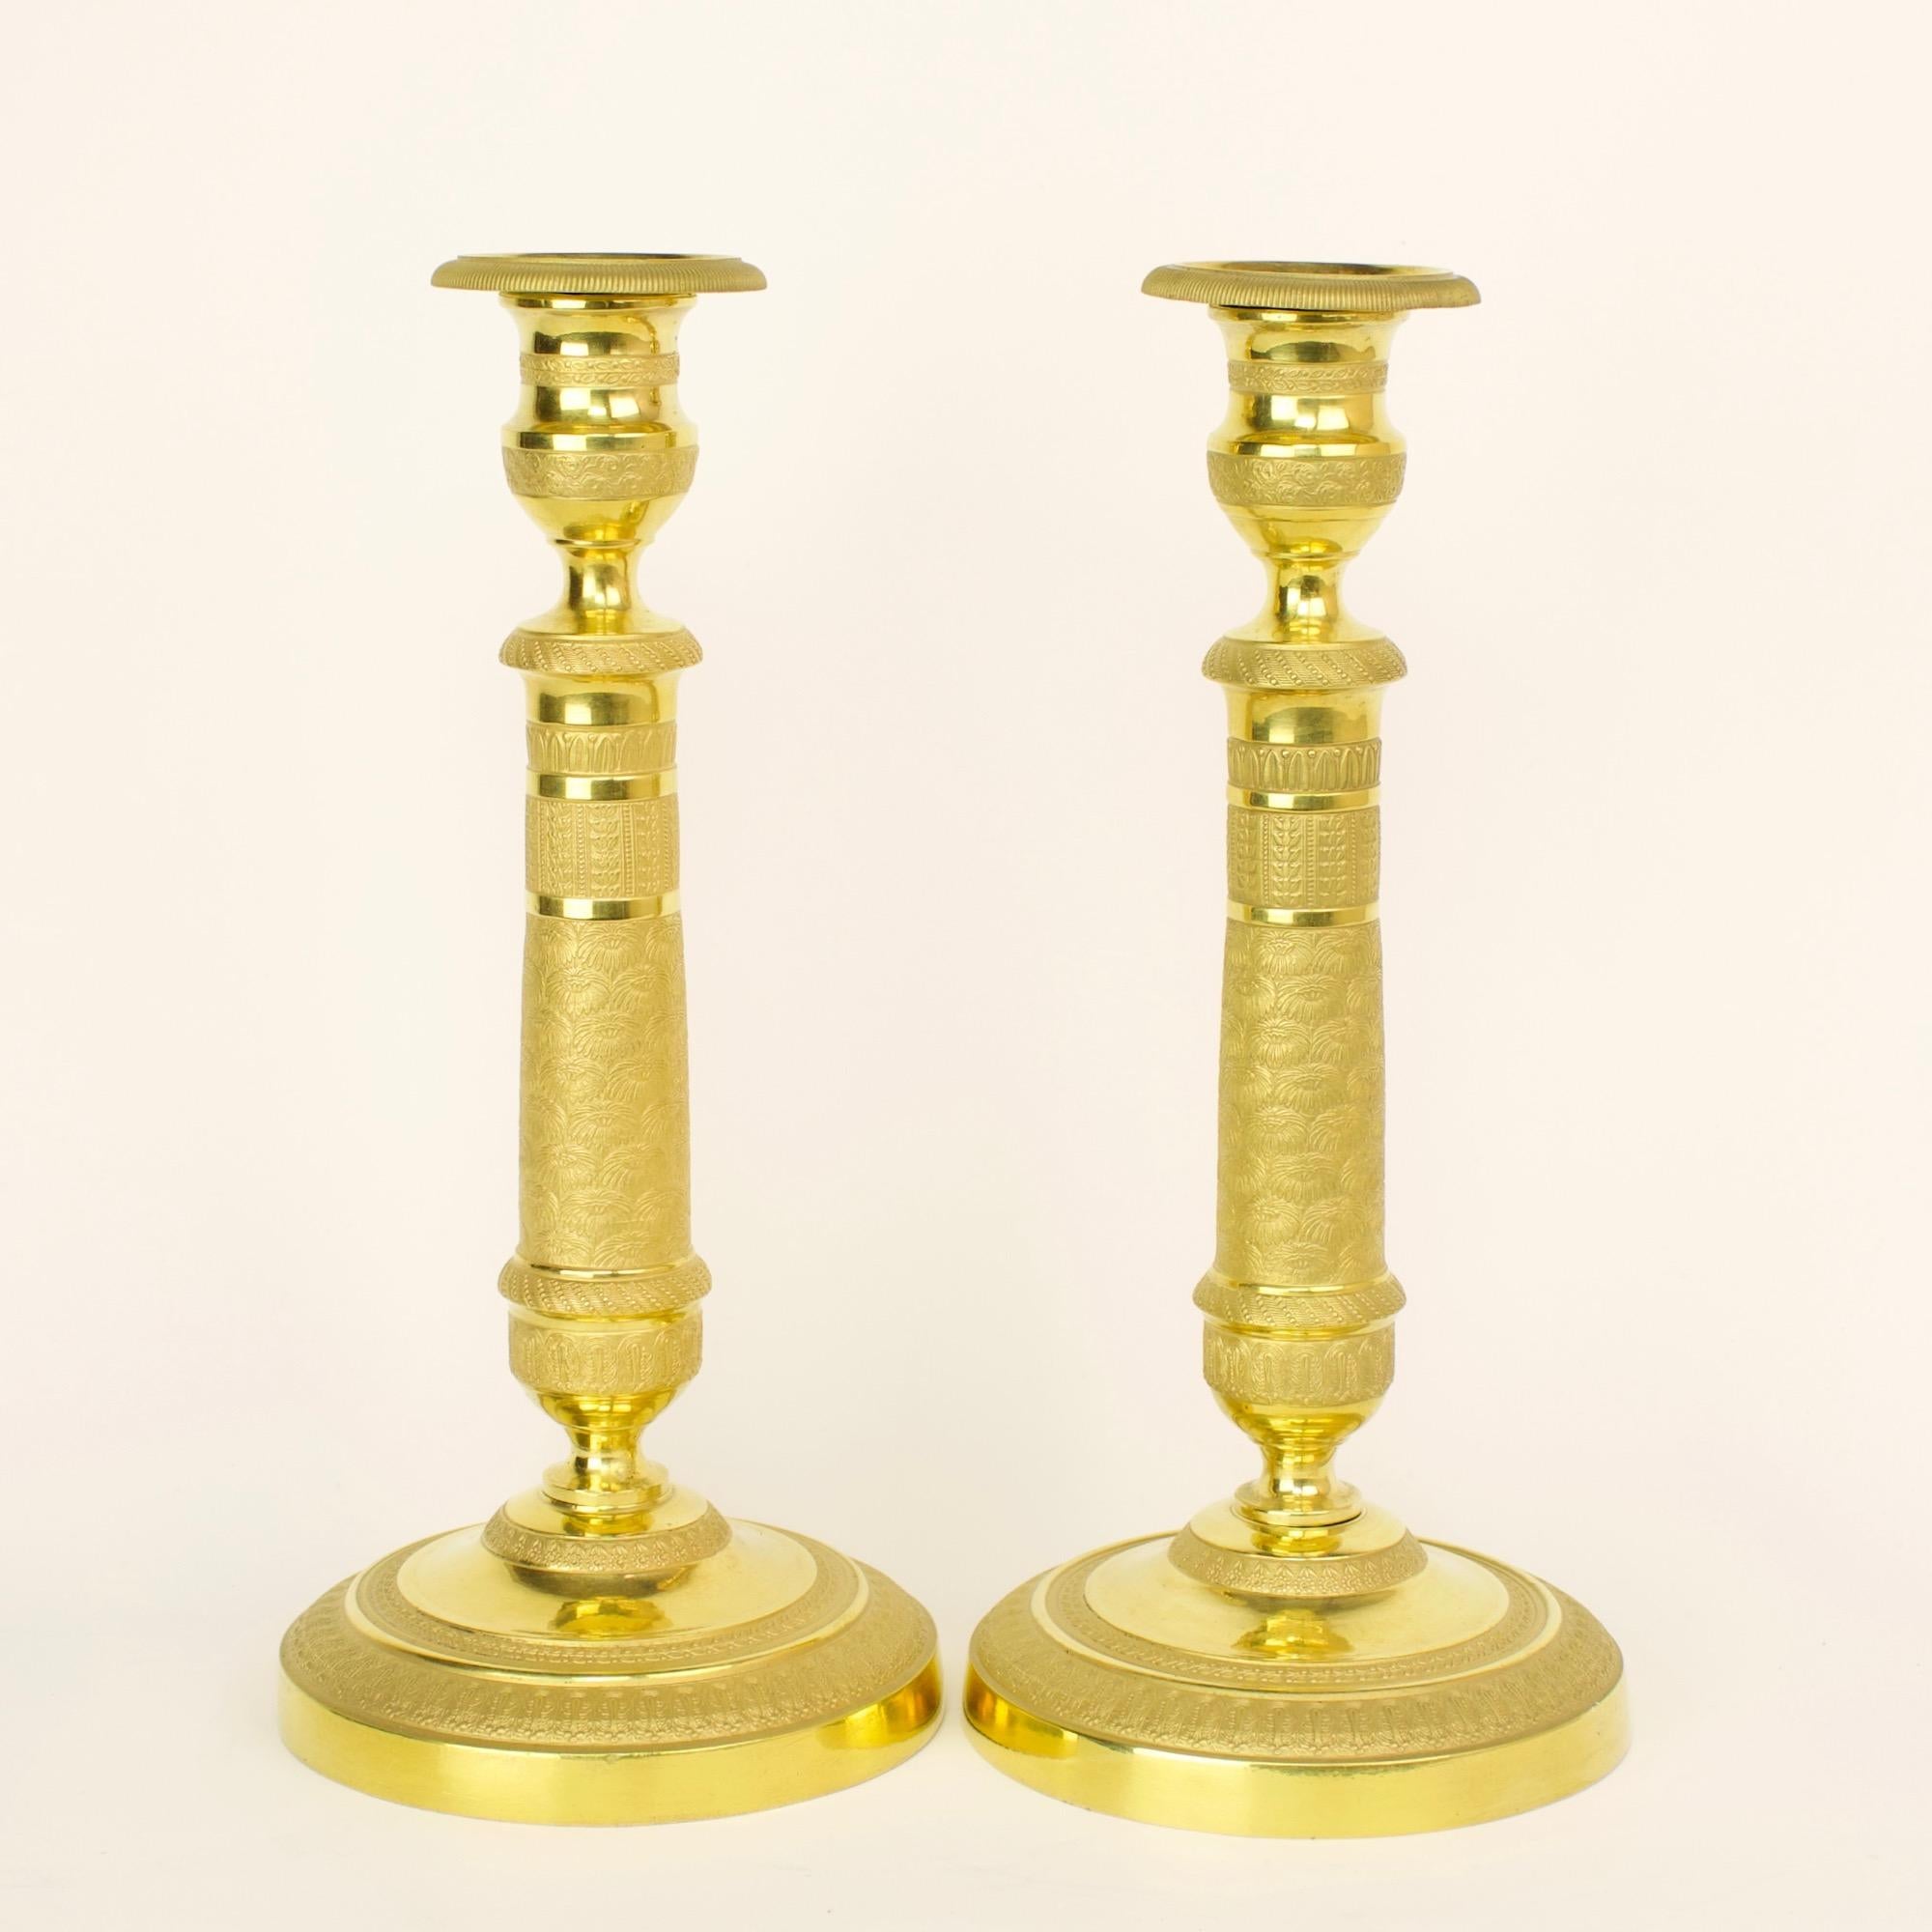 Pair of Early 19 Century French Empire Gilt Bronze Neoclassical Candlesticks For Sale 4